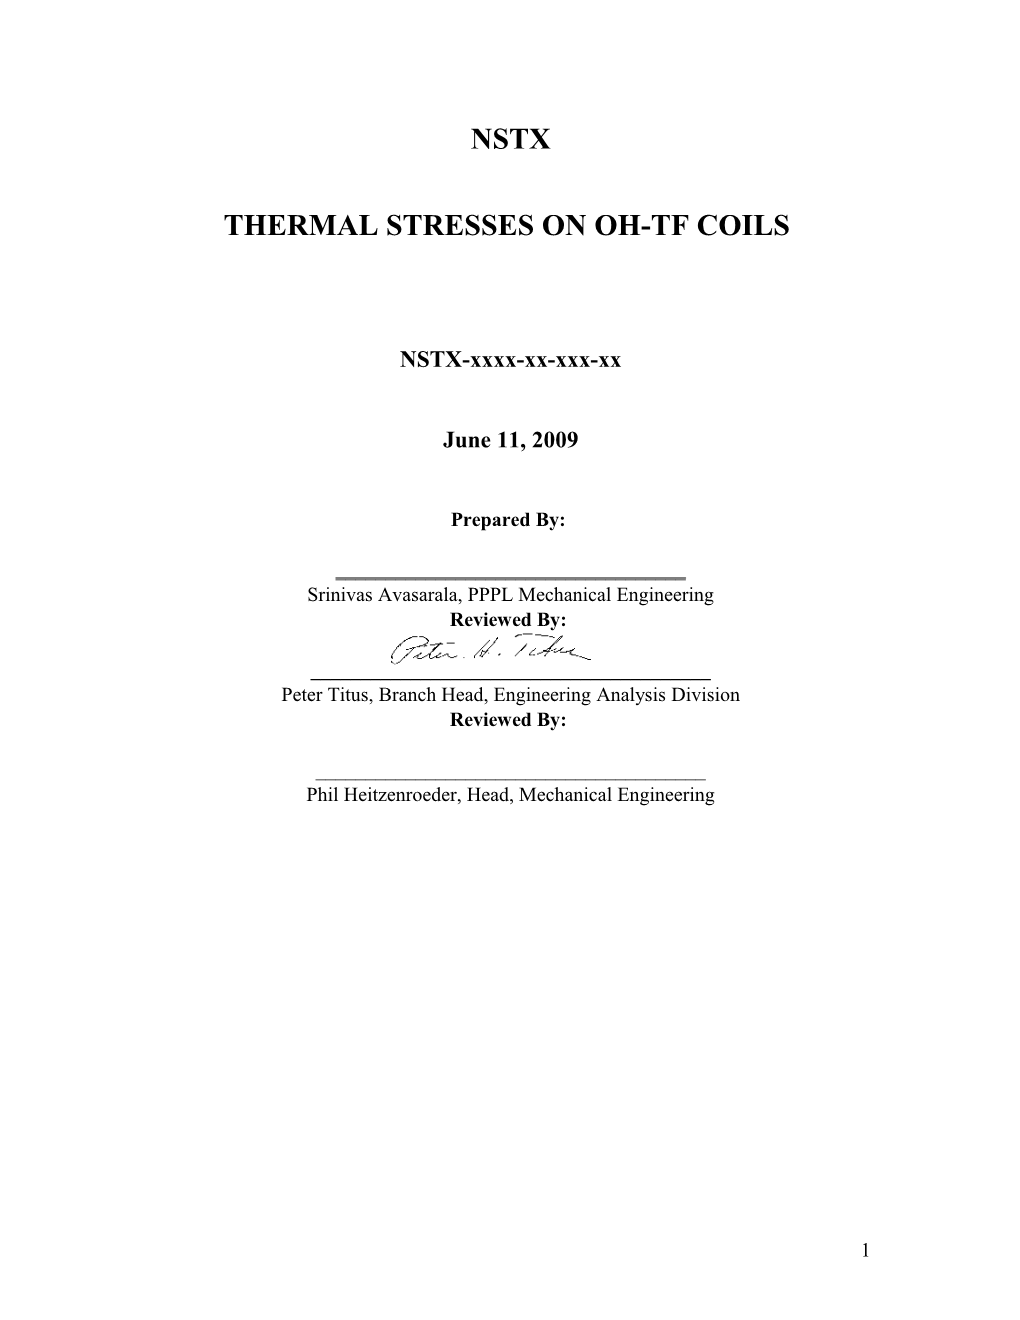 Thermal Stresses on Oh-Tf Coils